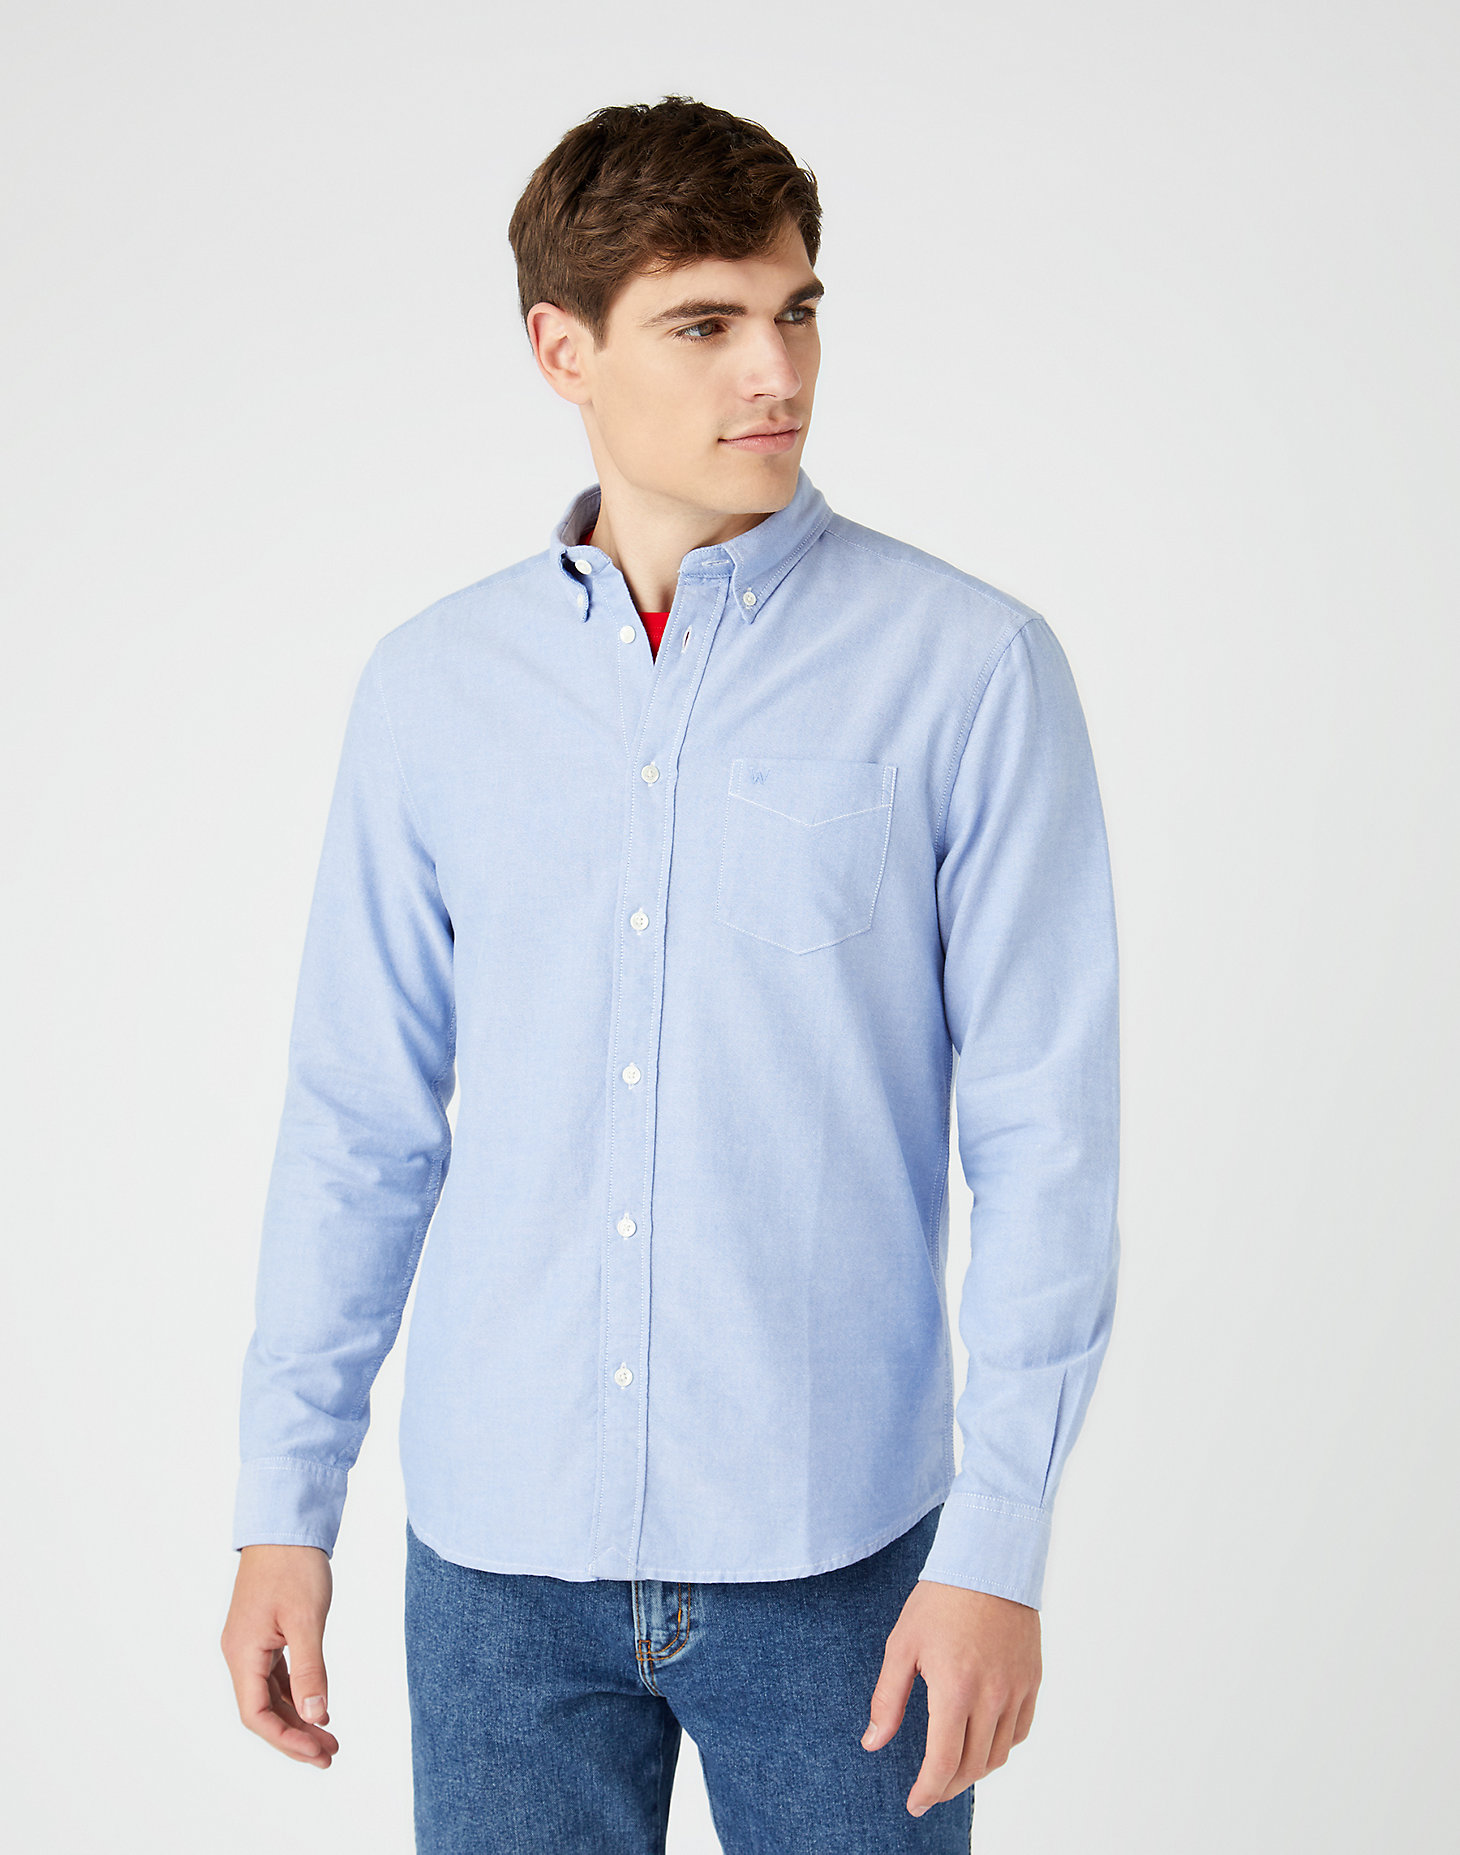 Long Sleeve One Pocket Shirt in Limoges Blue main view